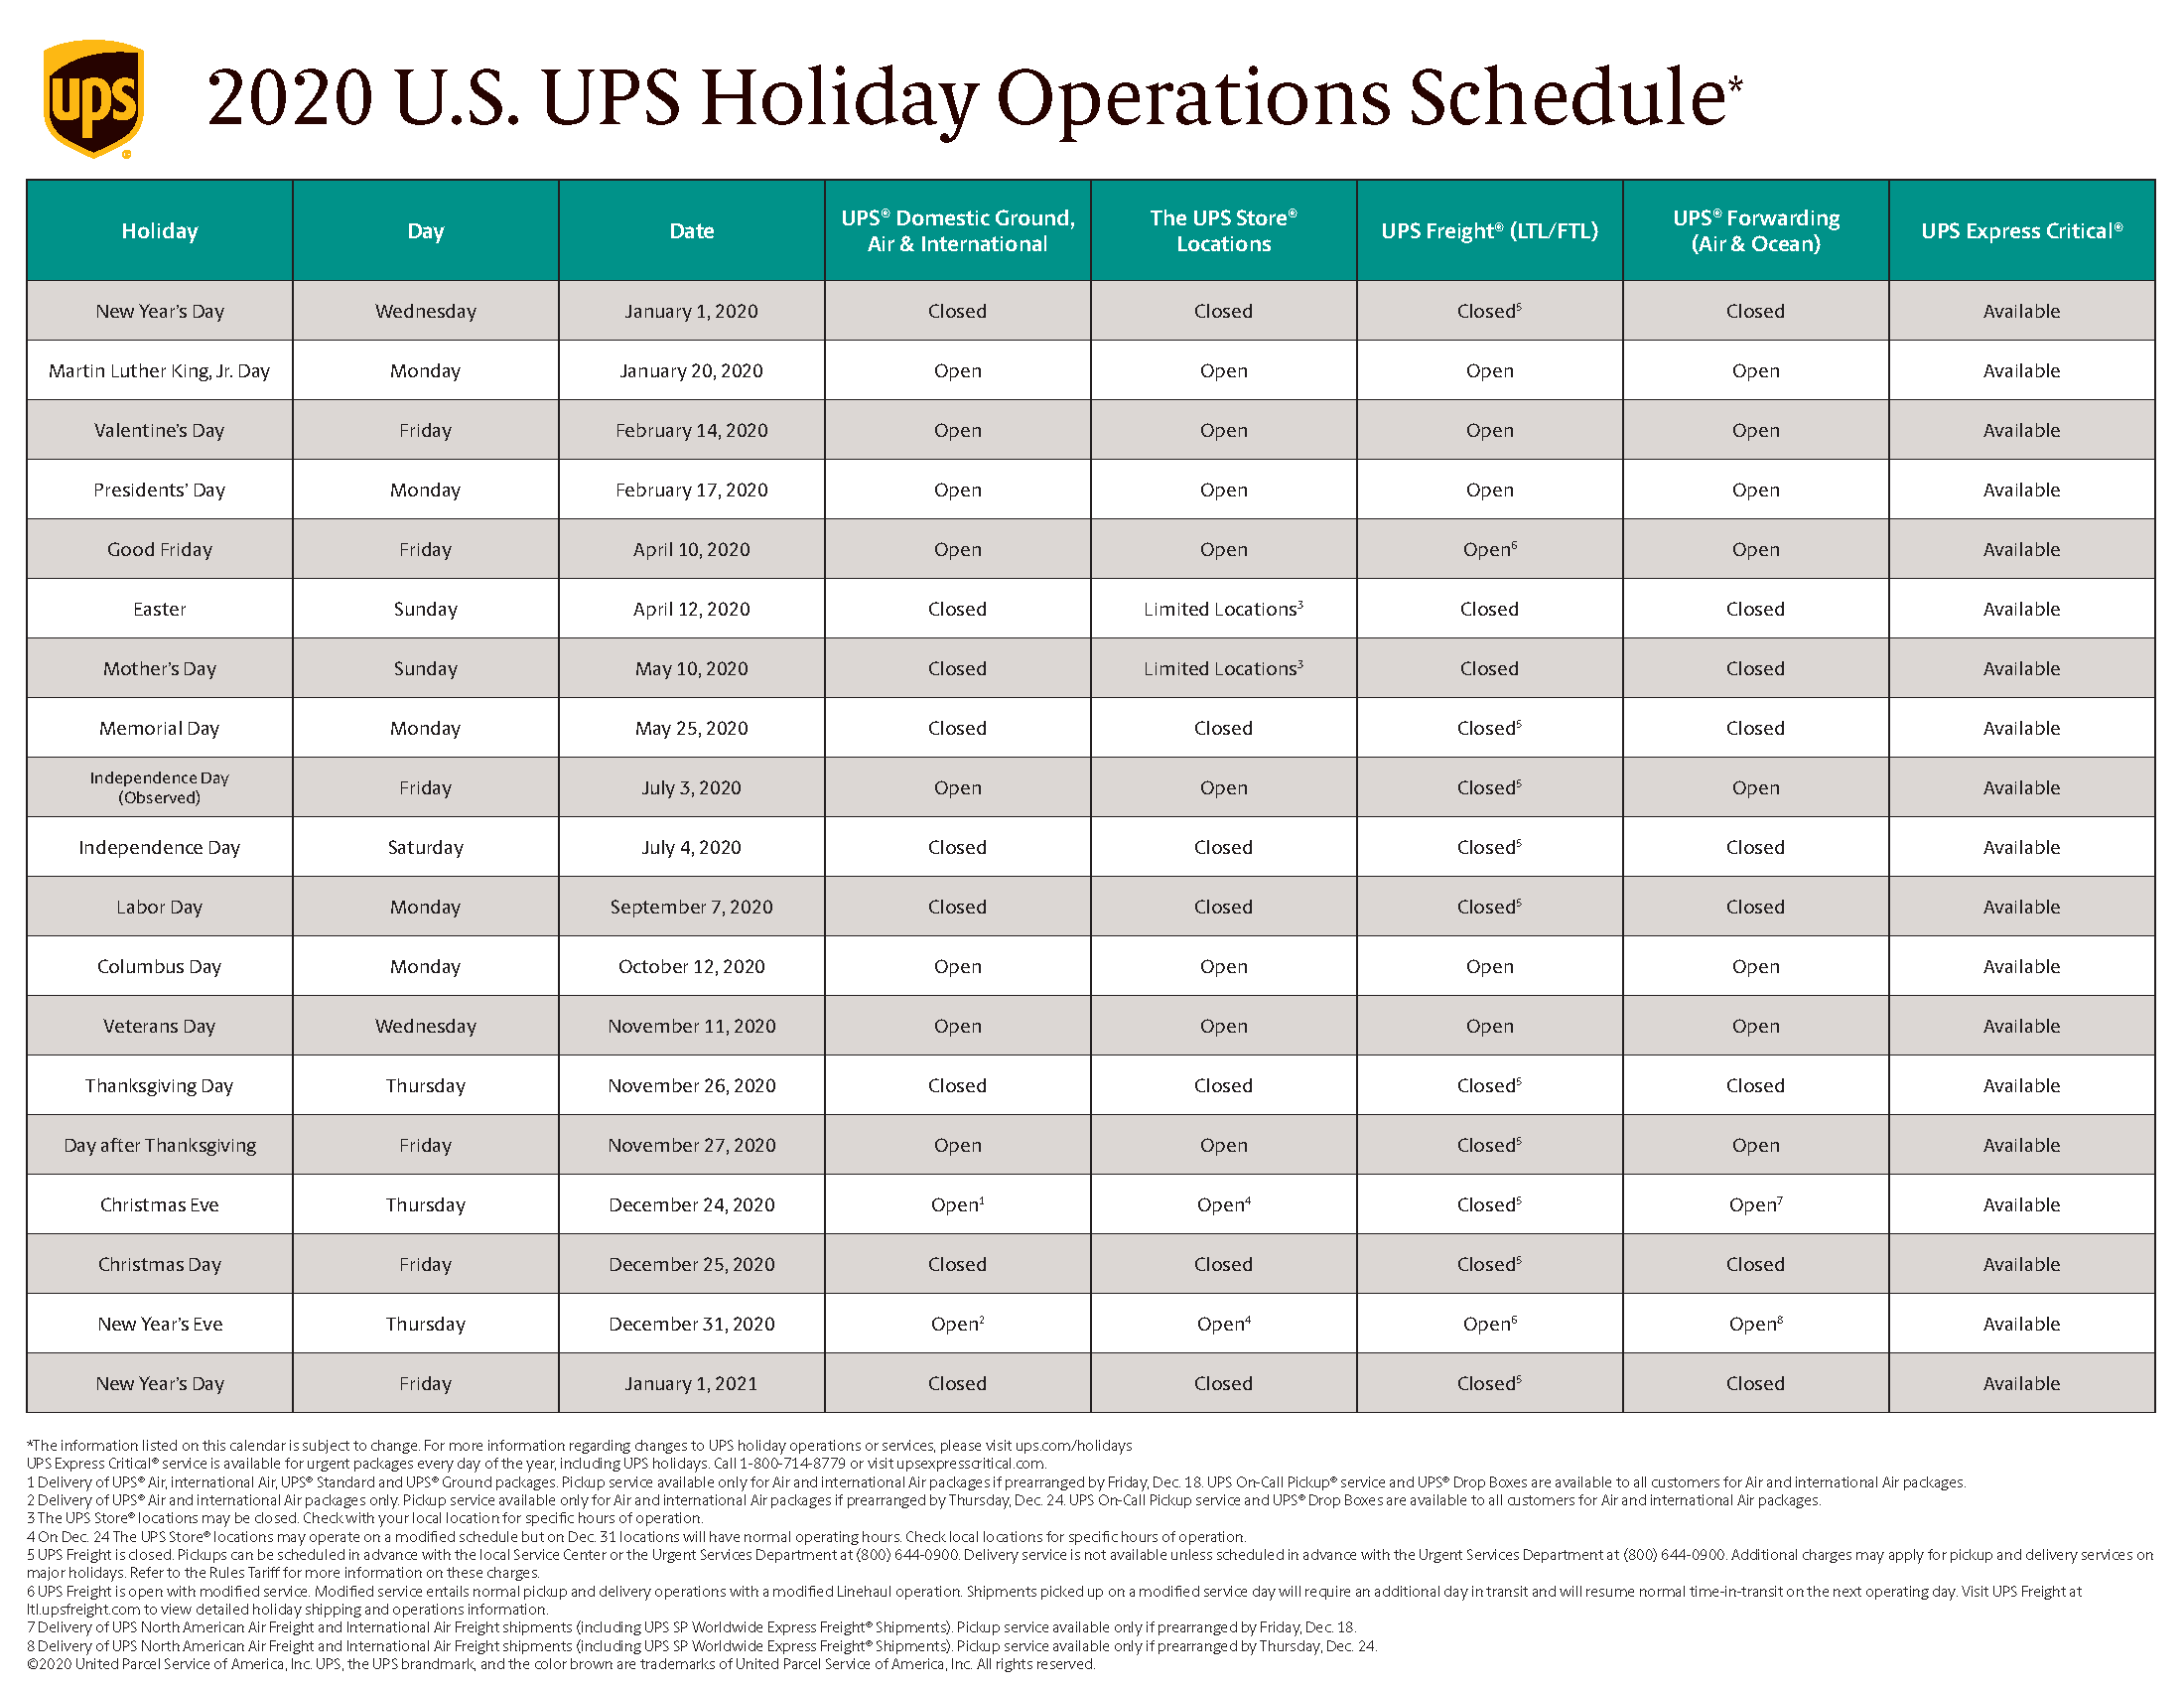 2020 UPS HOLIDAY SCHEDULE